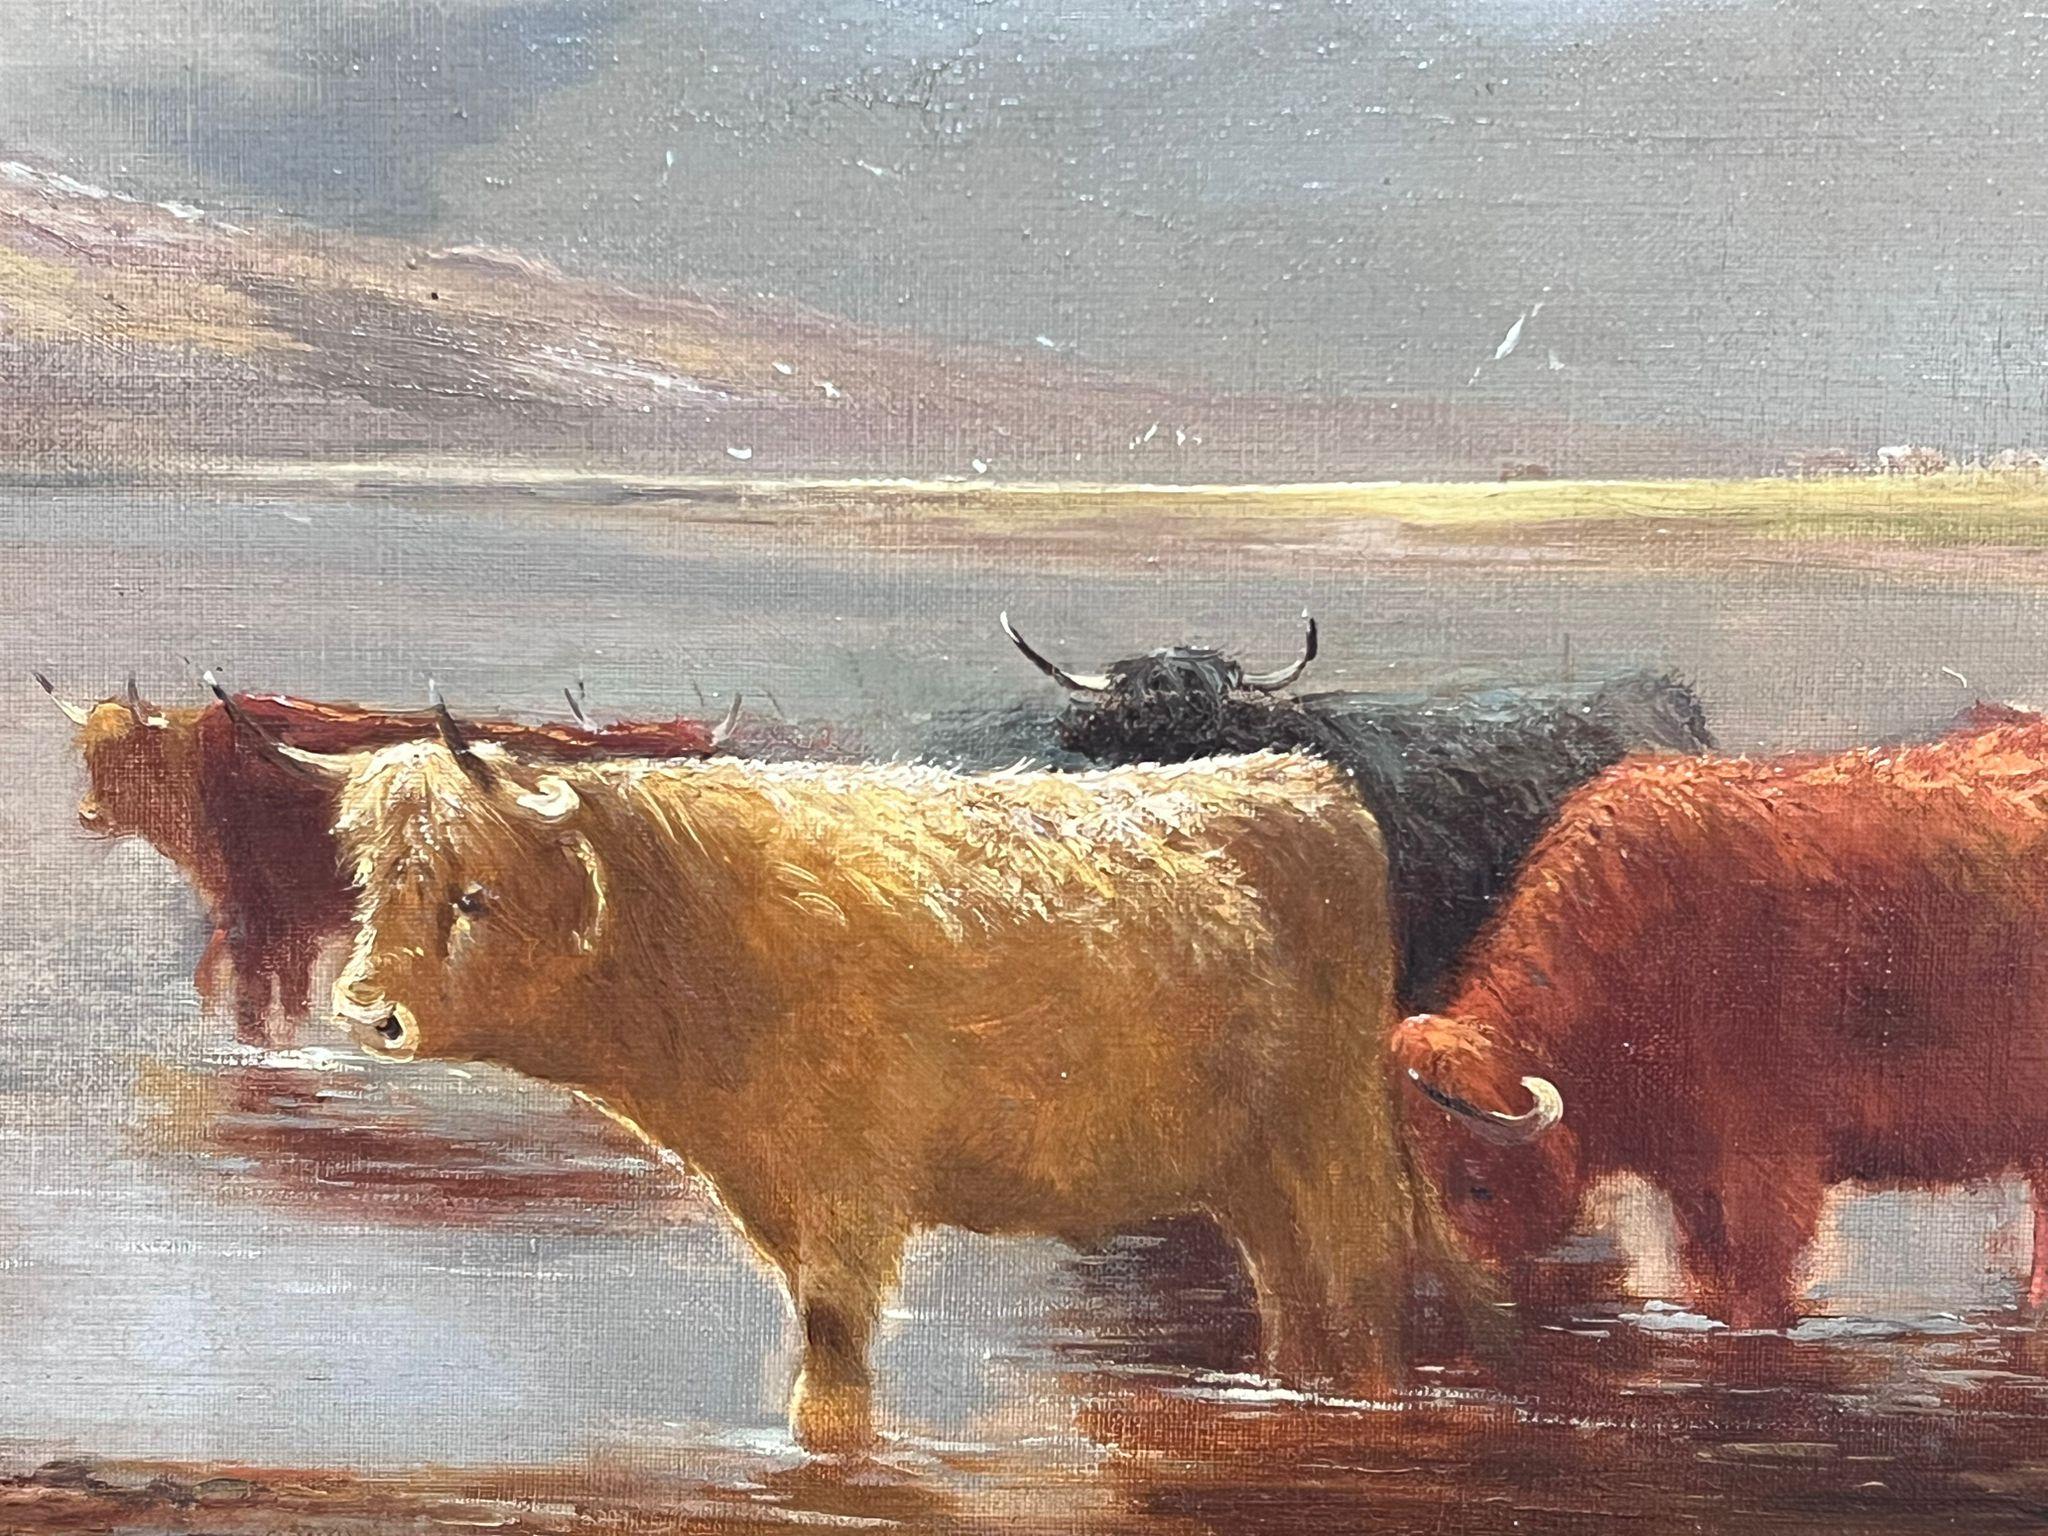 Cattle on the Loch's Shore
by Henry Hadfield Cubley (British 1858-1934) *see below
signed oil on canvas
framed in elaborate gilt swept frame
dated 1899 verso
framed: 26 x 36 inches
canvas: 20 x 29.5 inches
provenance: private collection,